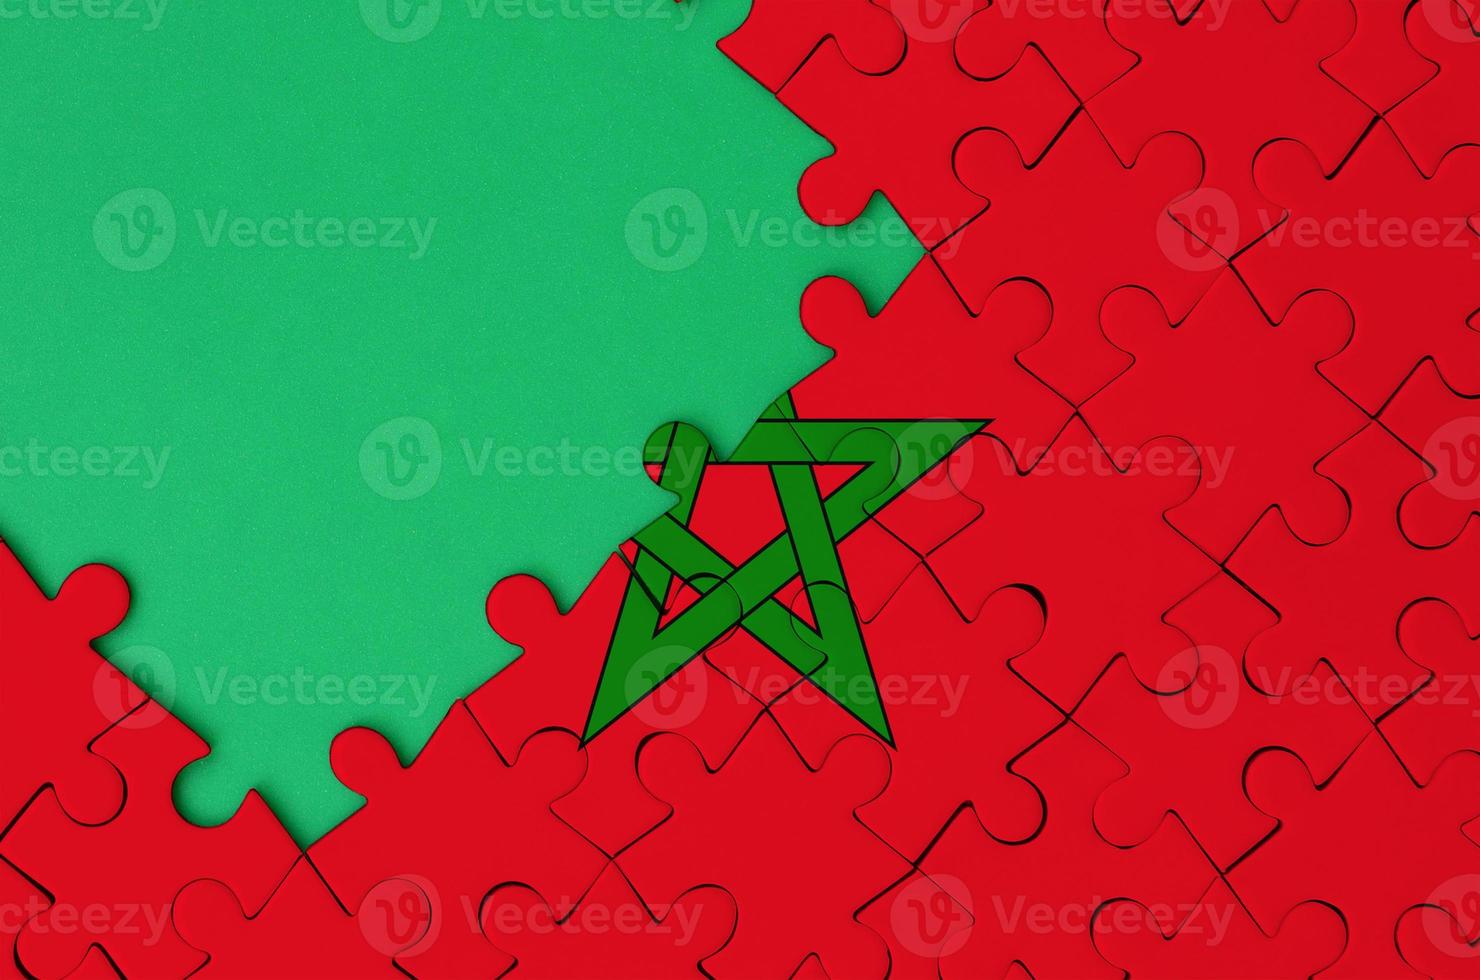 Morocco flag is depicted on a completed jigsaw puzzle with free green copy space on the left side photo